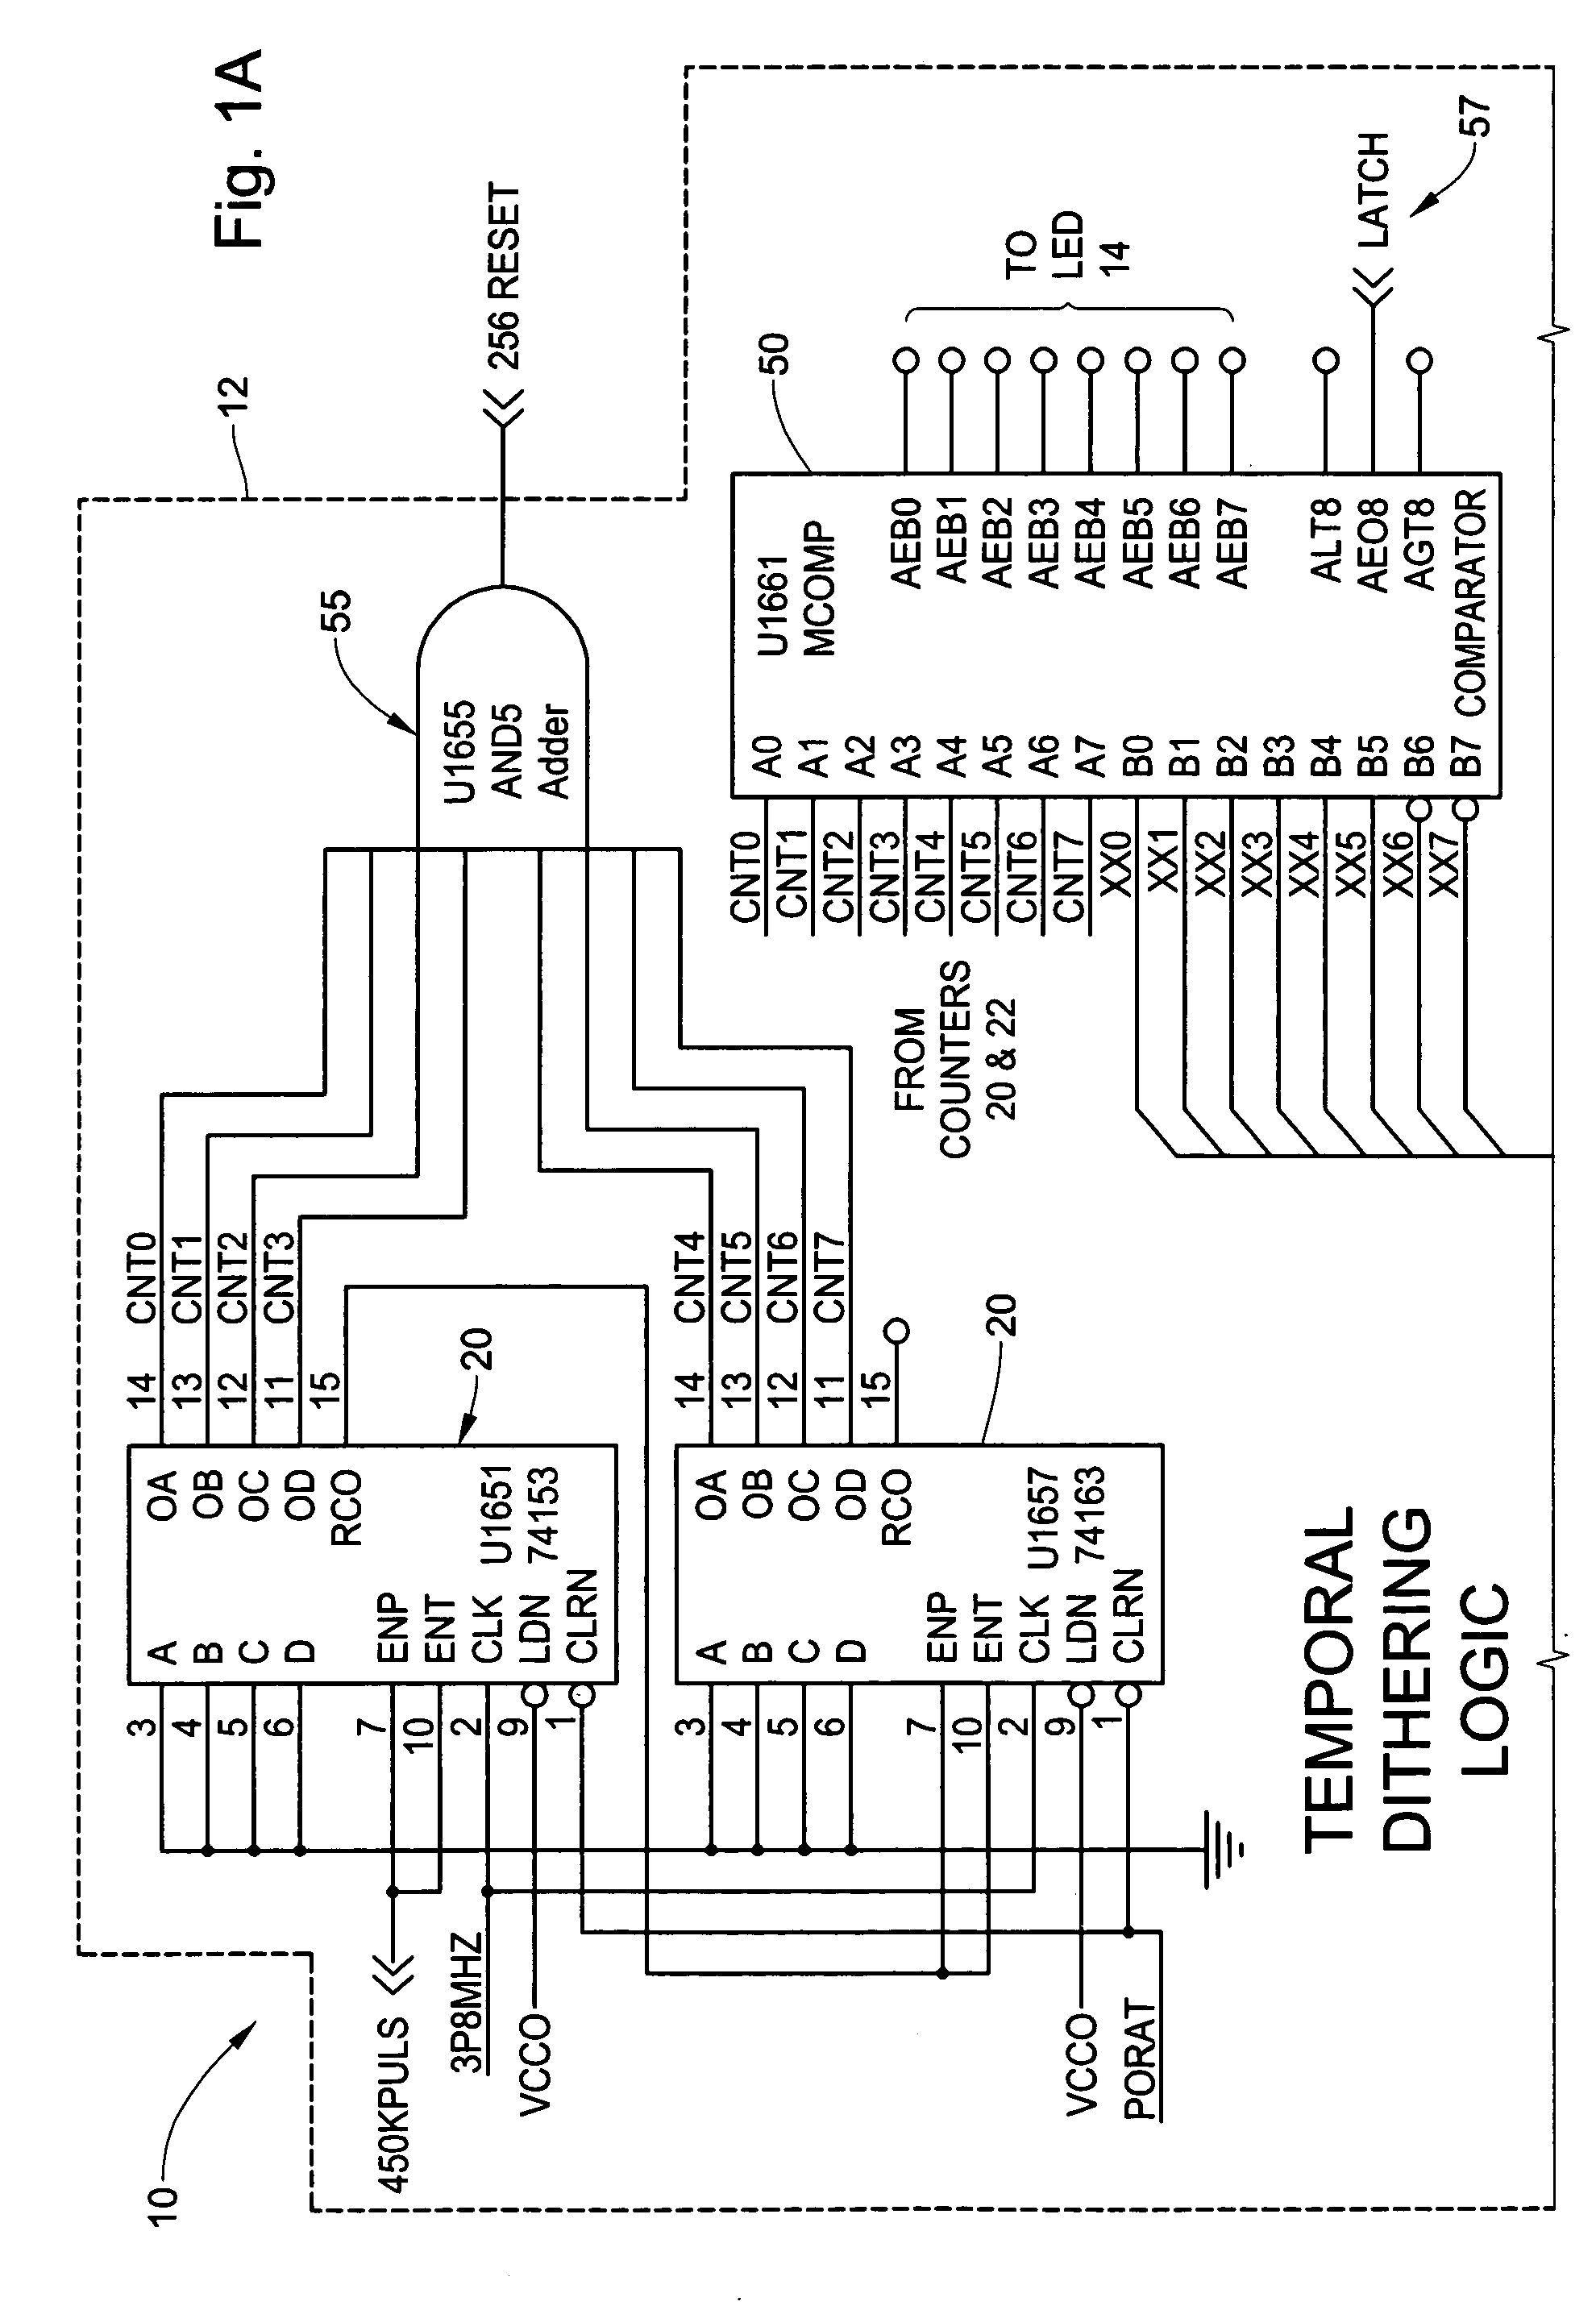 Method and system for LED temporal dithering to achieve multi-bit color resolution